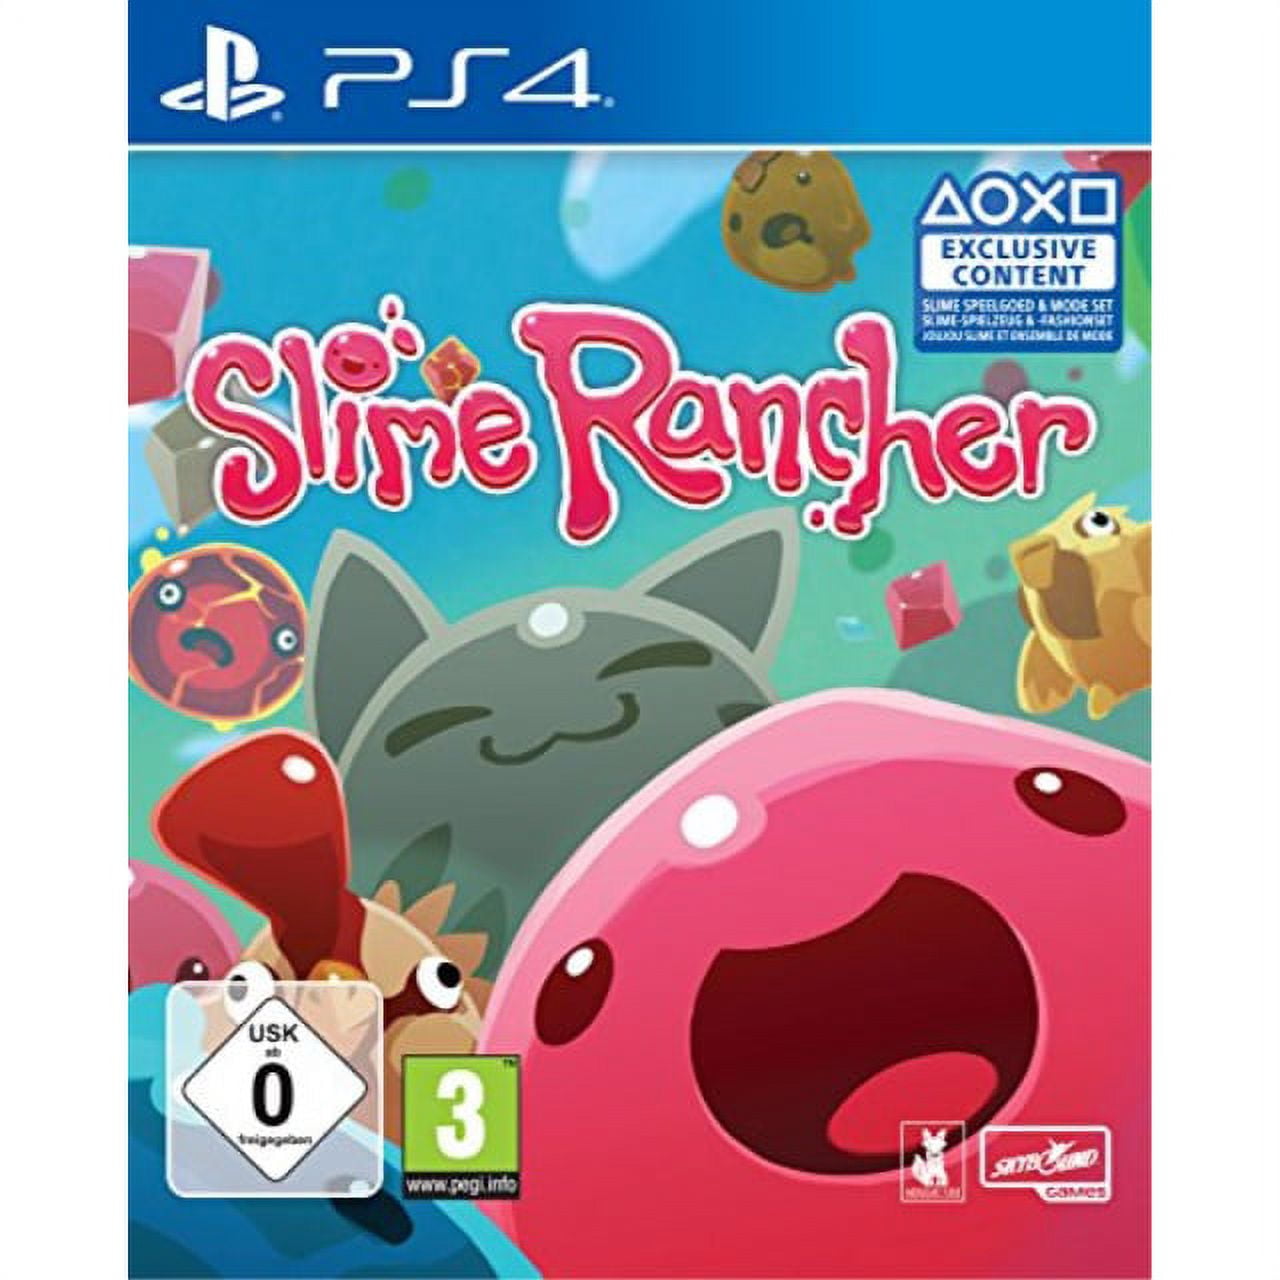 Slime Rancher (Playstation 4 / PS4) Choose from 3 game modes